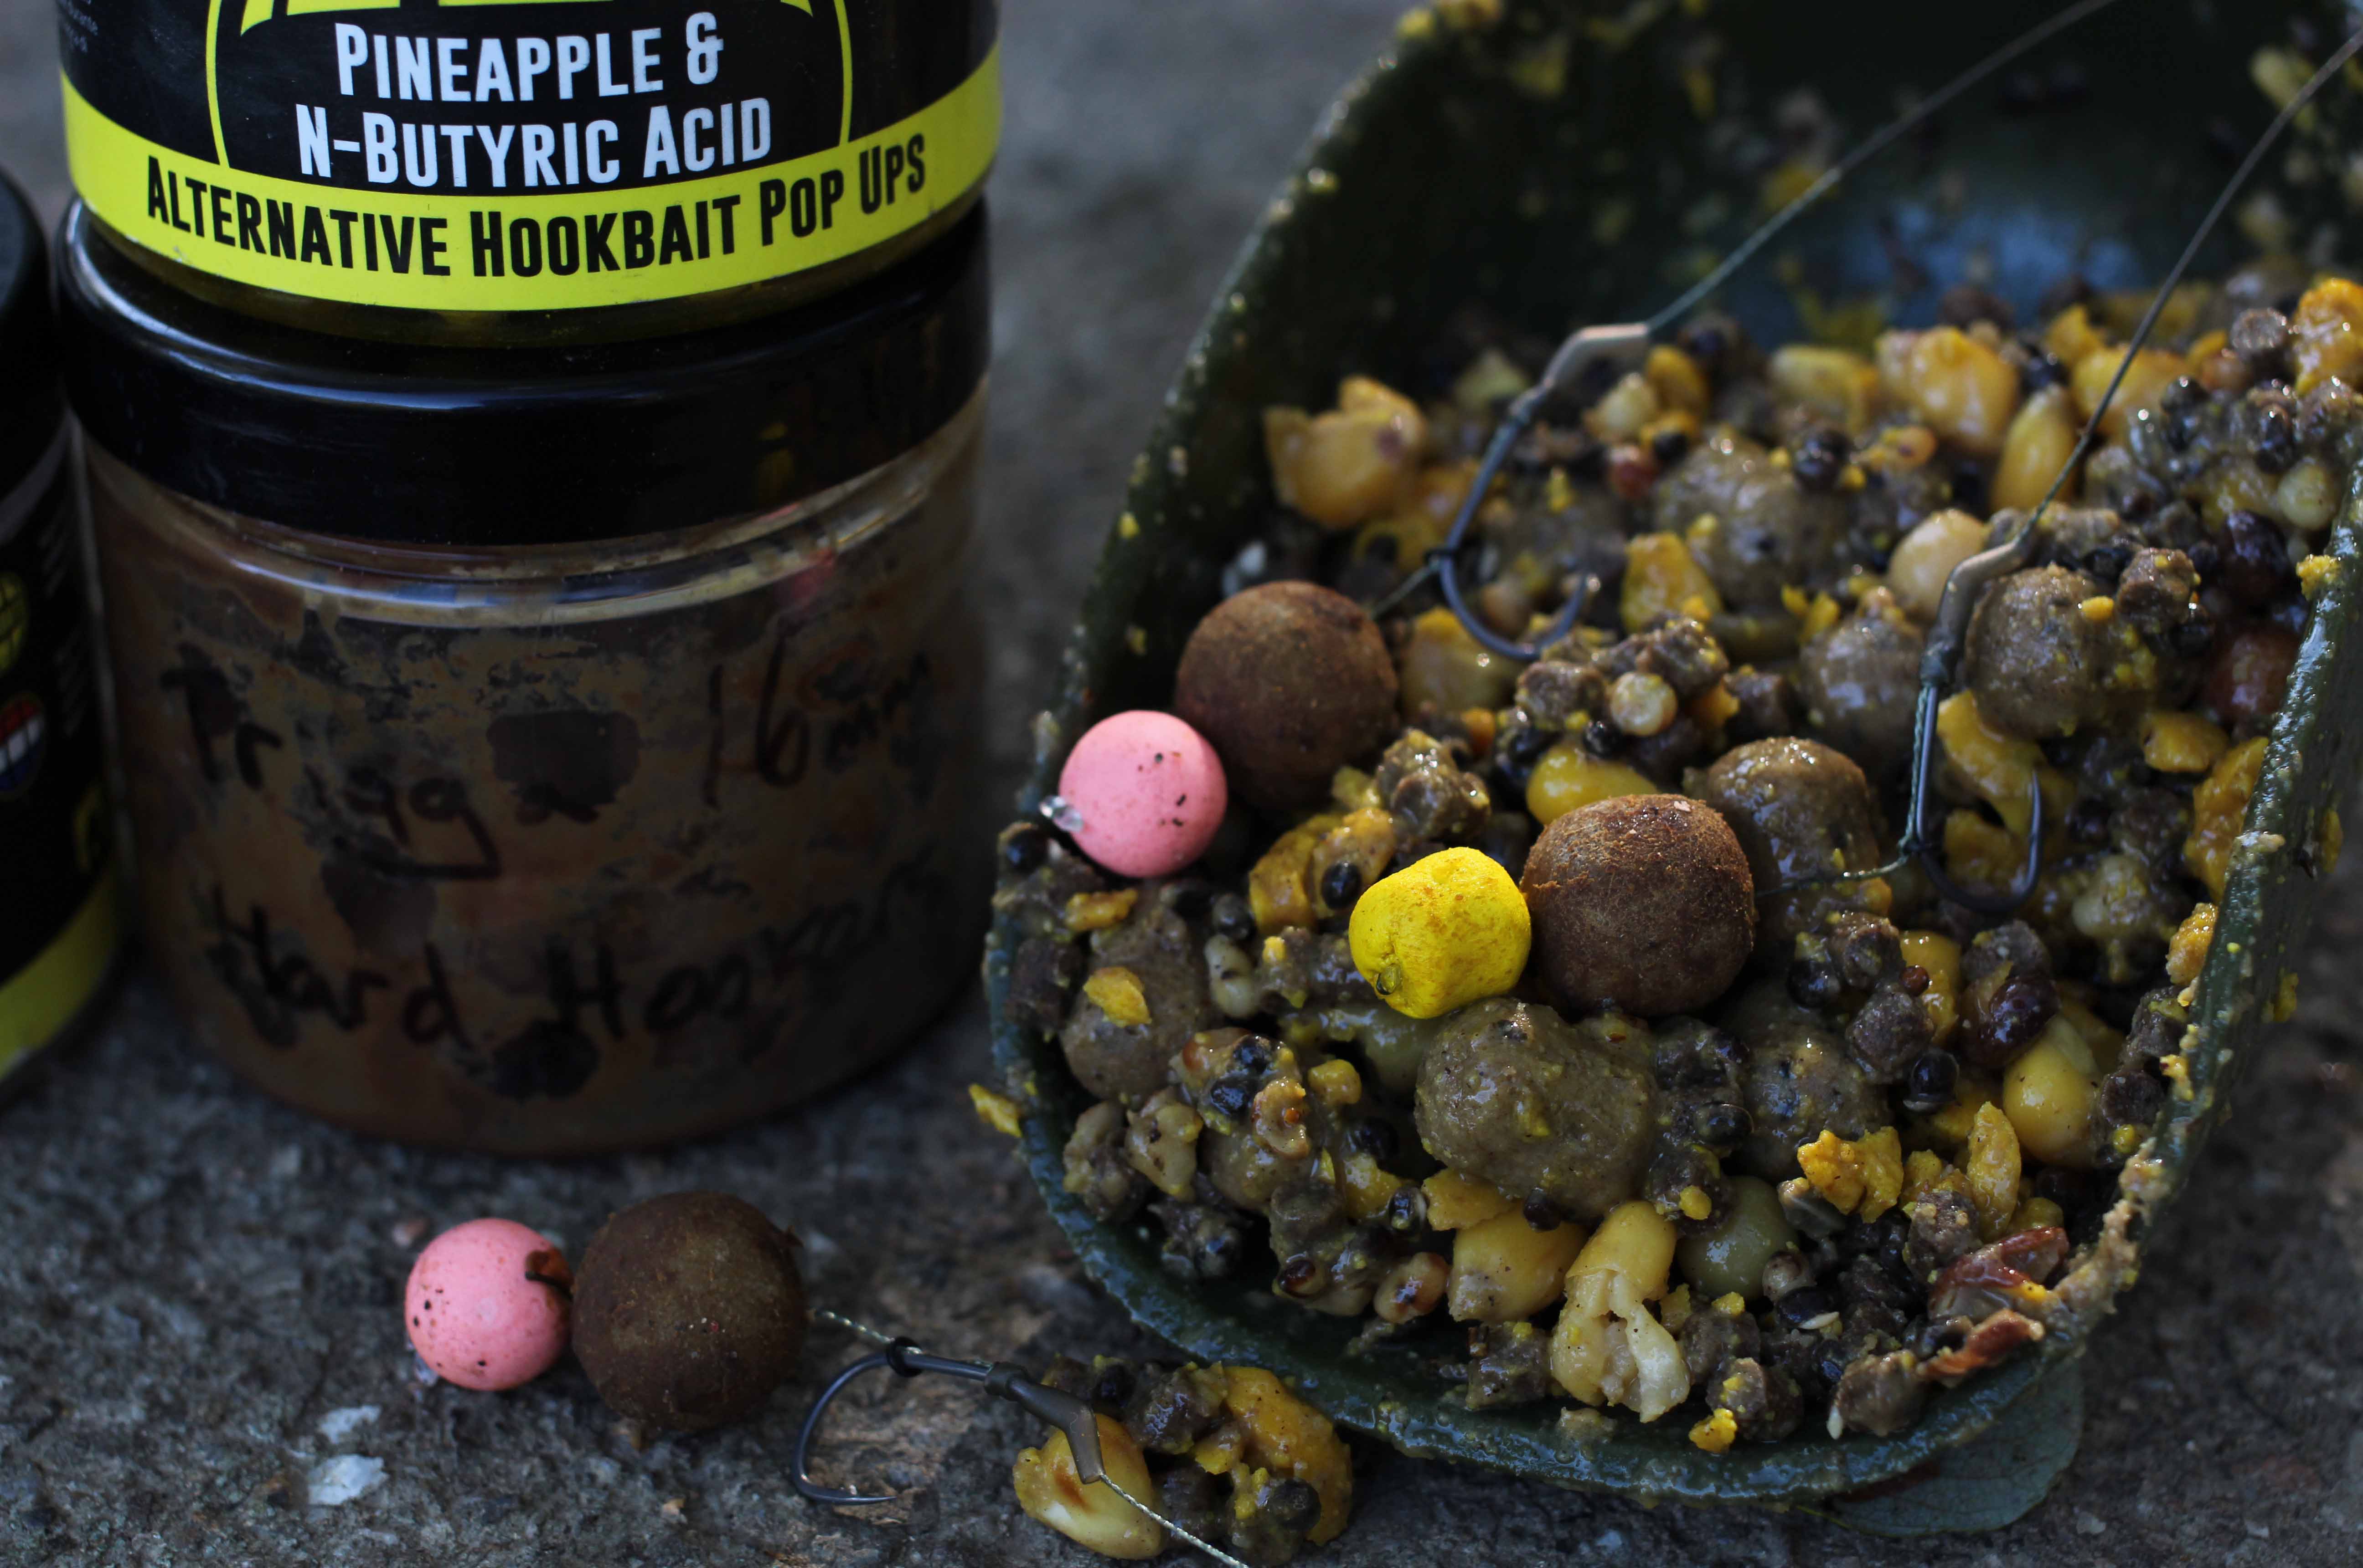 Nutrabaits - 5 FLOATER FISHING TIPS YOU NEED TO KNOW - Carp Bait - Boilies,  Pop-Ups, Pellets